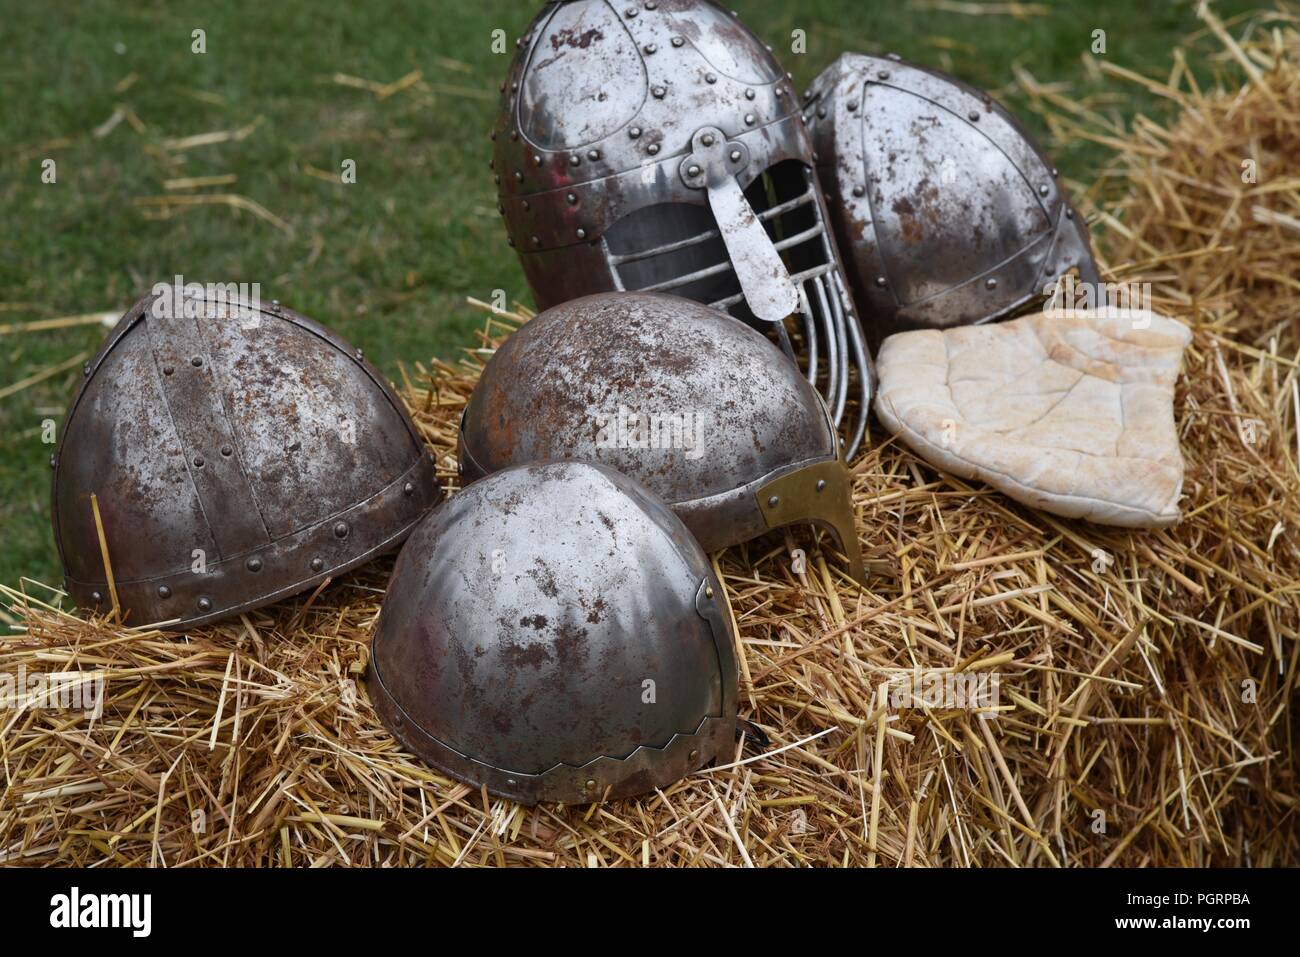 Helmets: a selection reproduction medieval helmets and a arming cap displayed on a straw bale Stock Photo